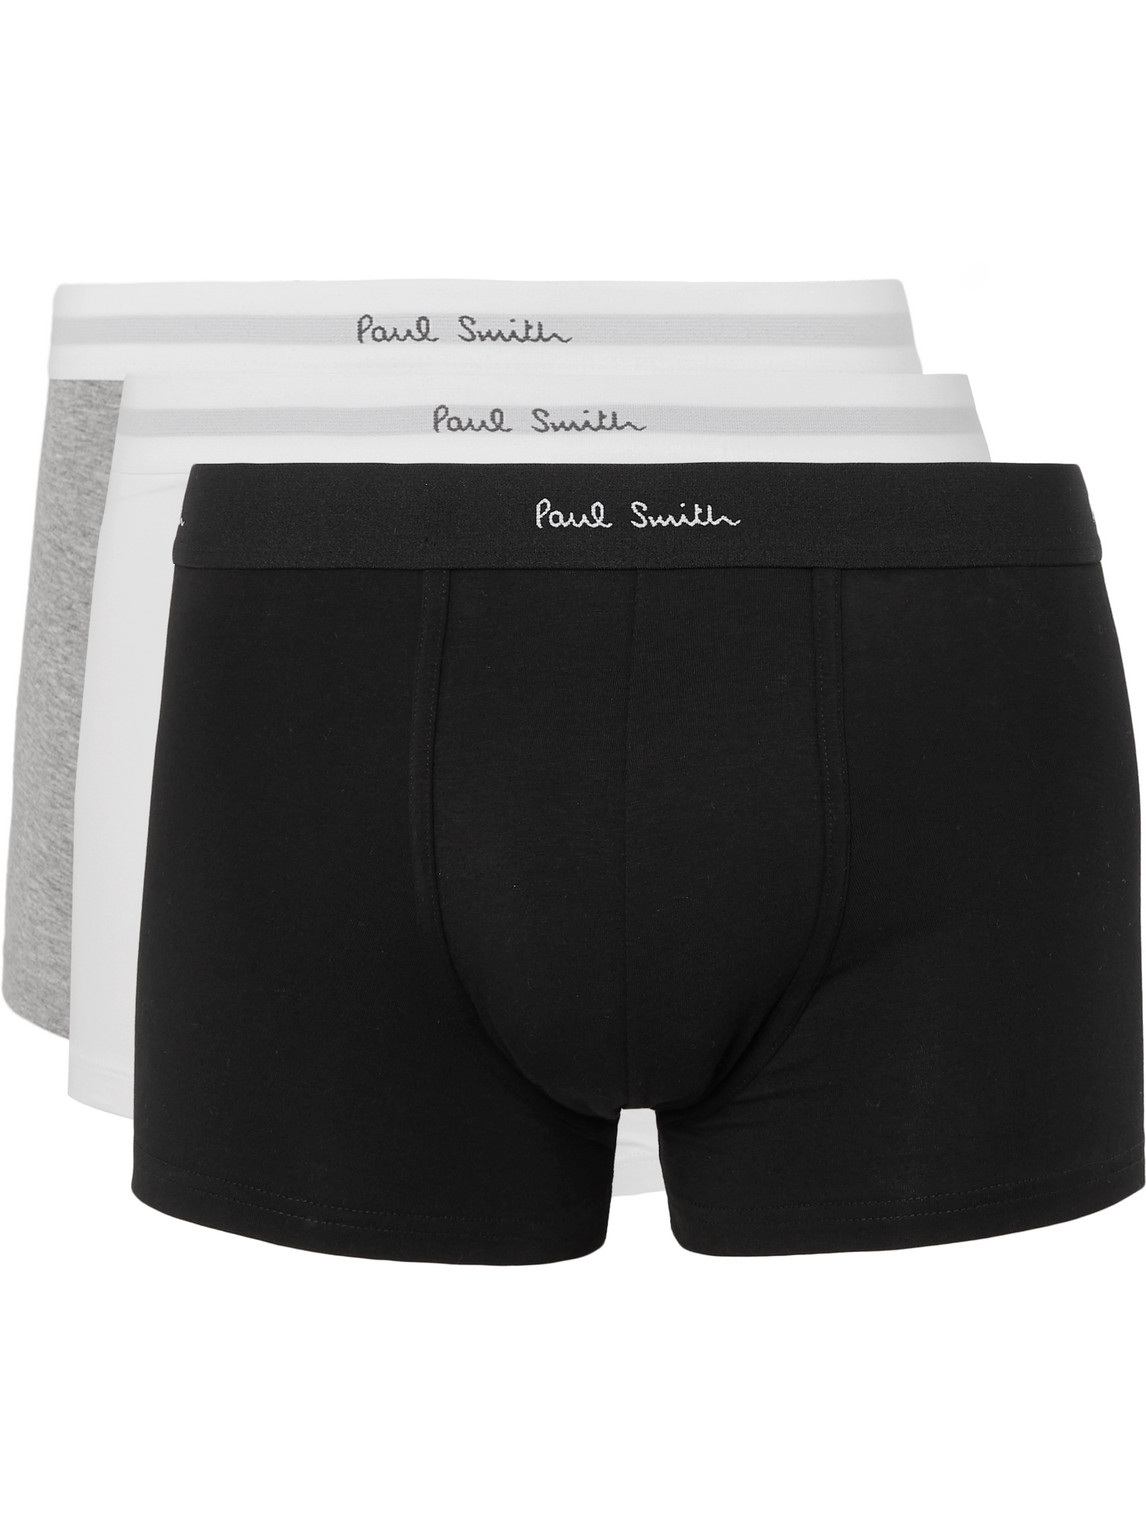 PAUL SMITH THREE-PACK STRETCH-COTTON BOXER BRIEFS